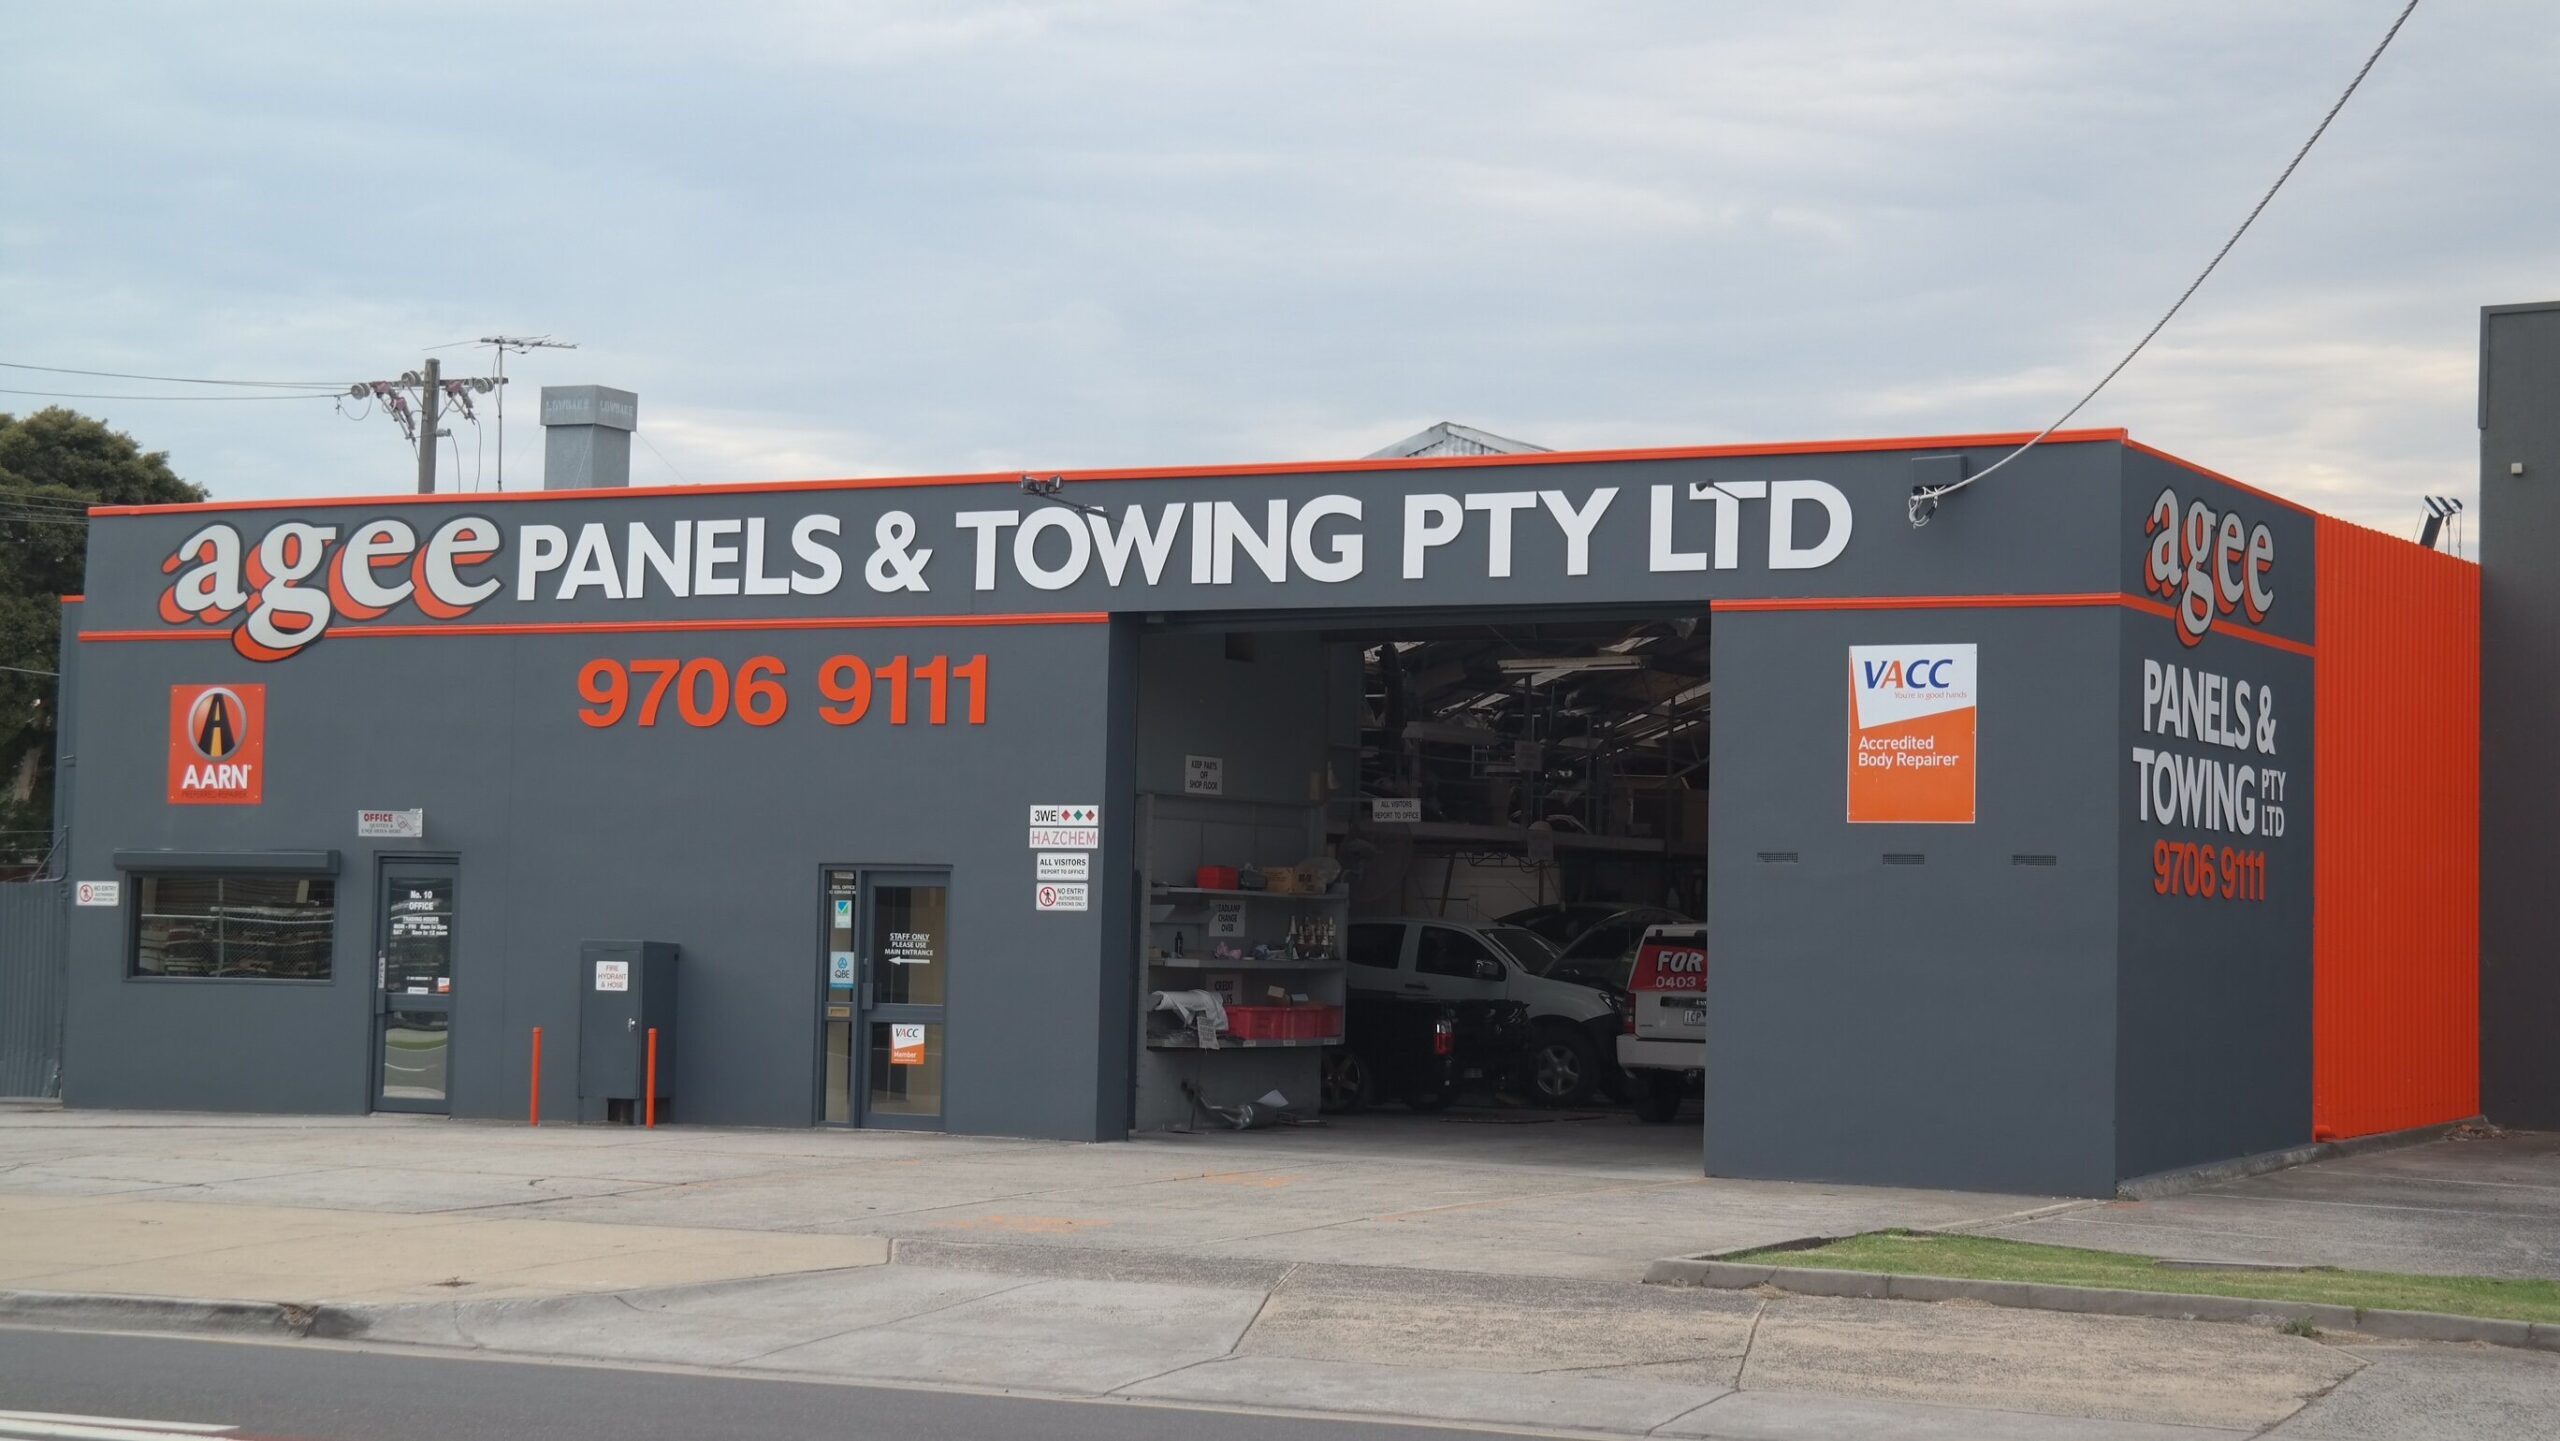 Agee panels & Towing Pty Ltd